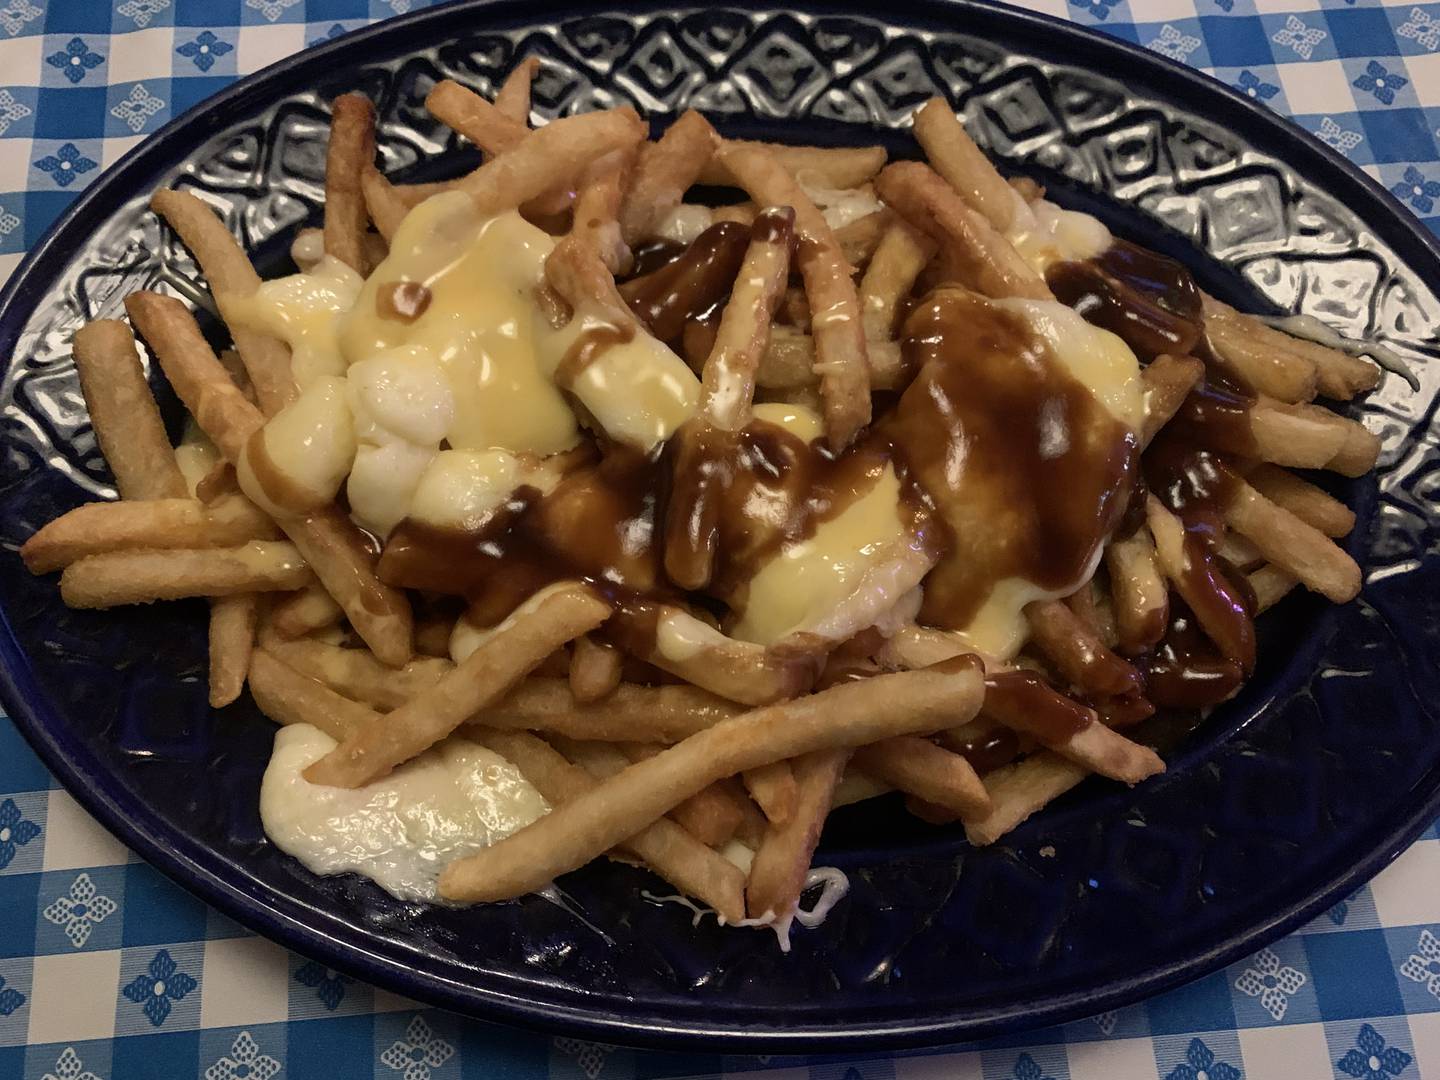 The Poutine at Cattleman's Burger snd Brew, beer battered french fries topped with melted cheese curds, brown gravy and a house-made four-cheese sauce.